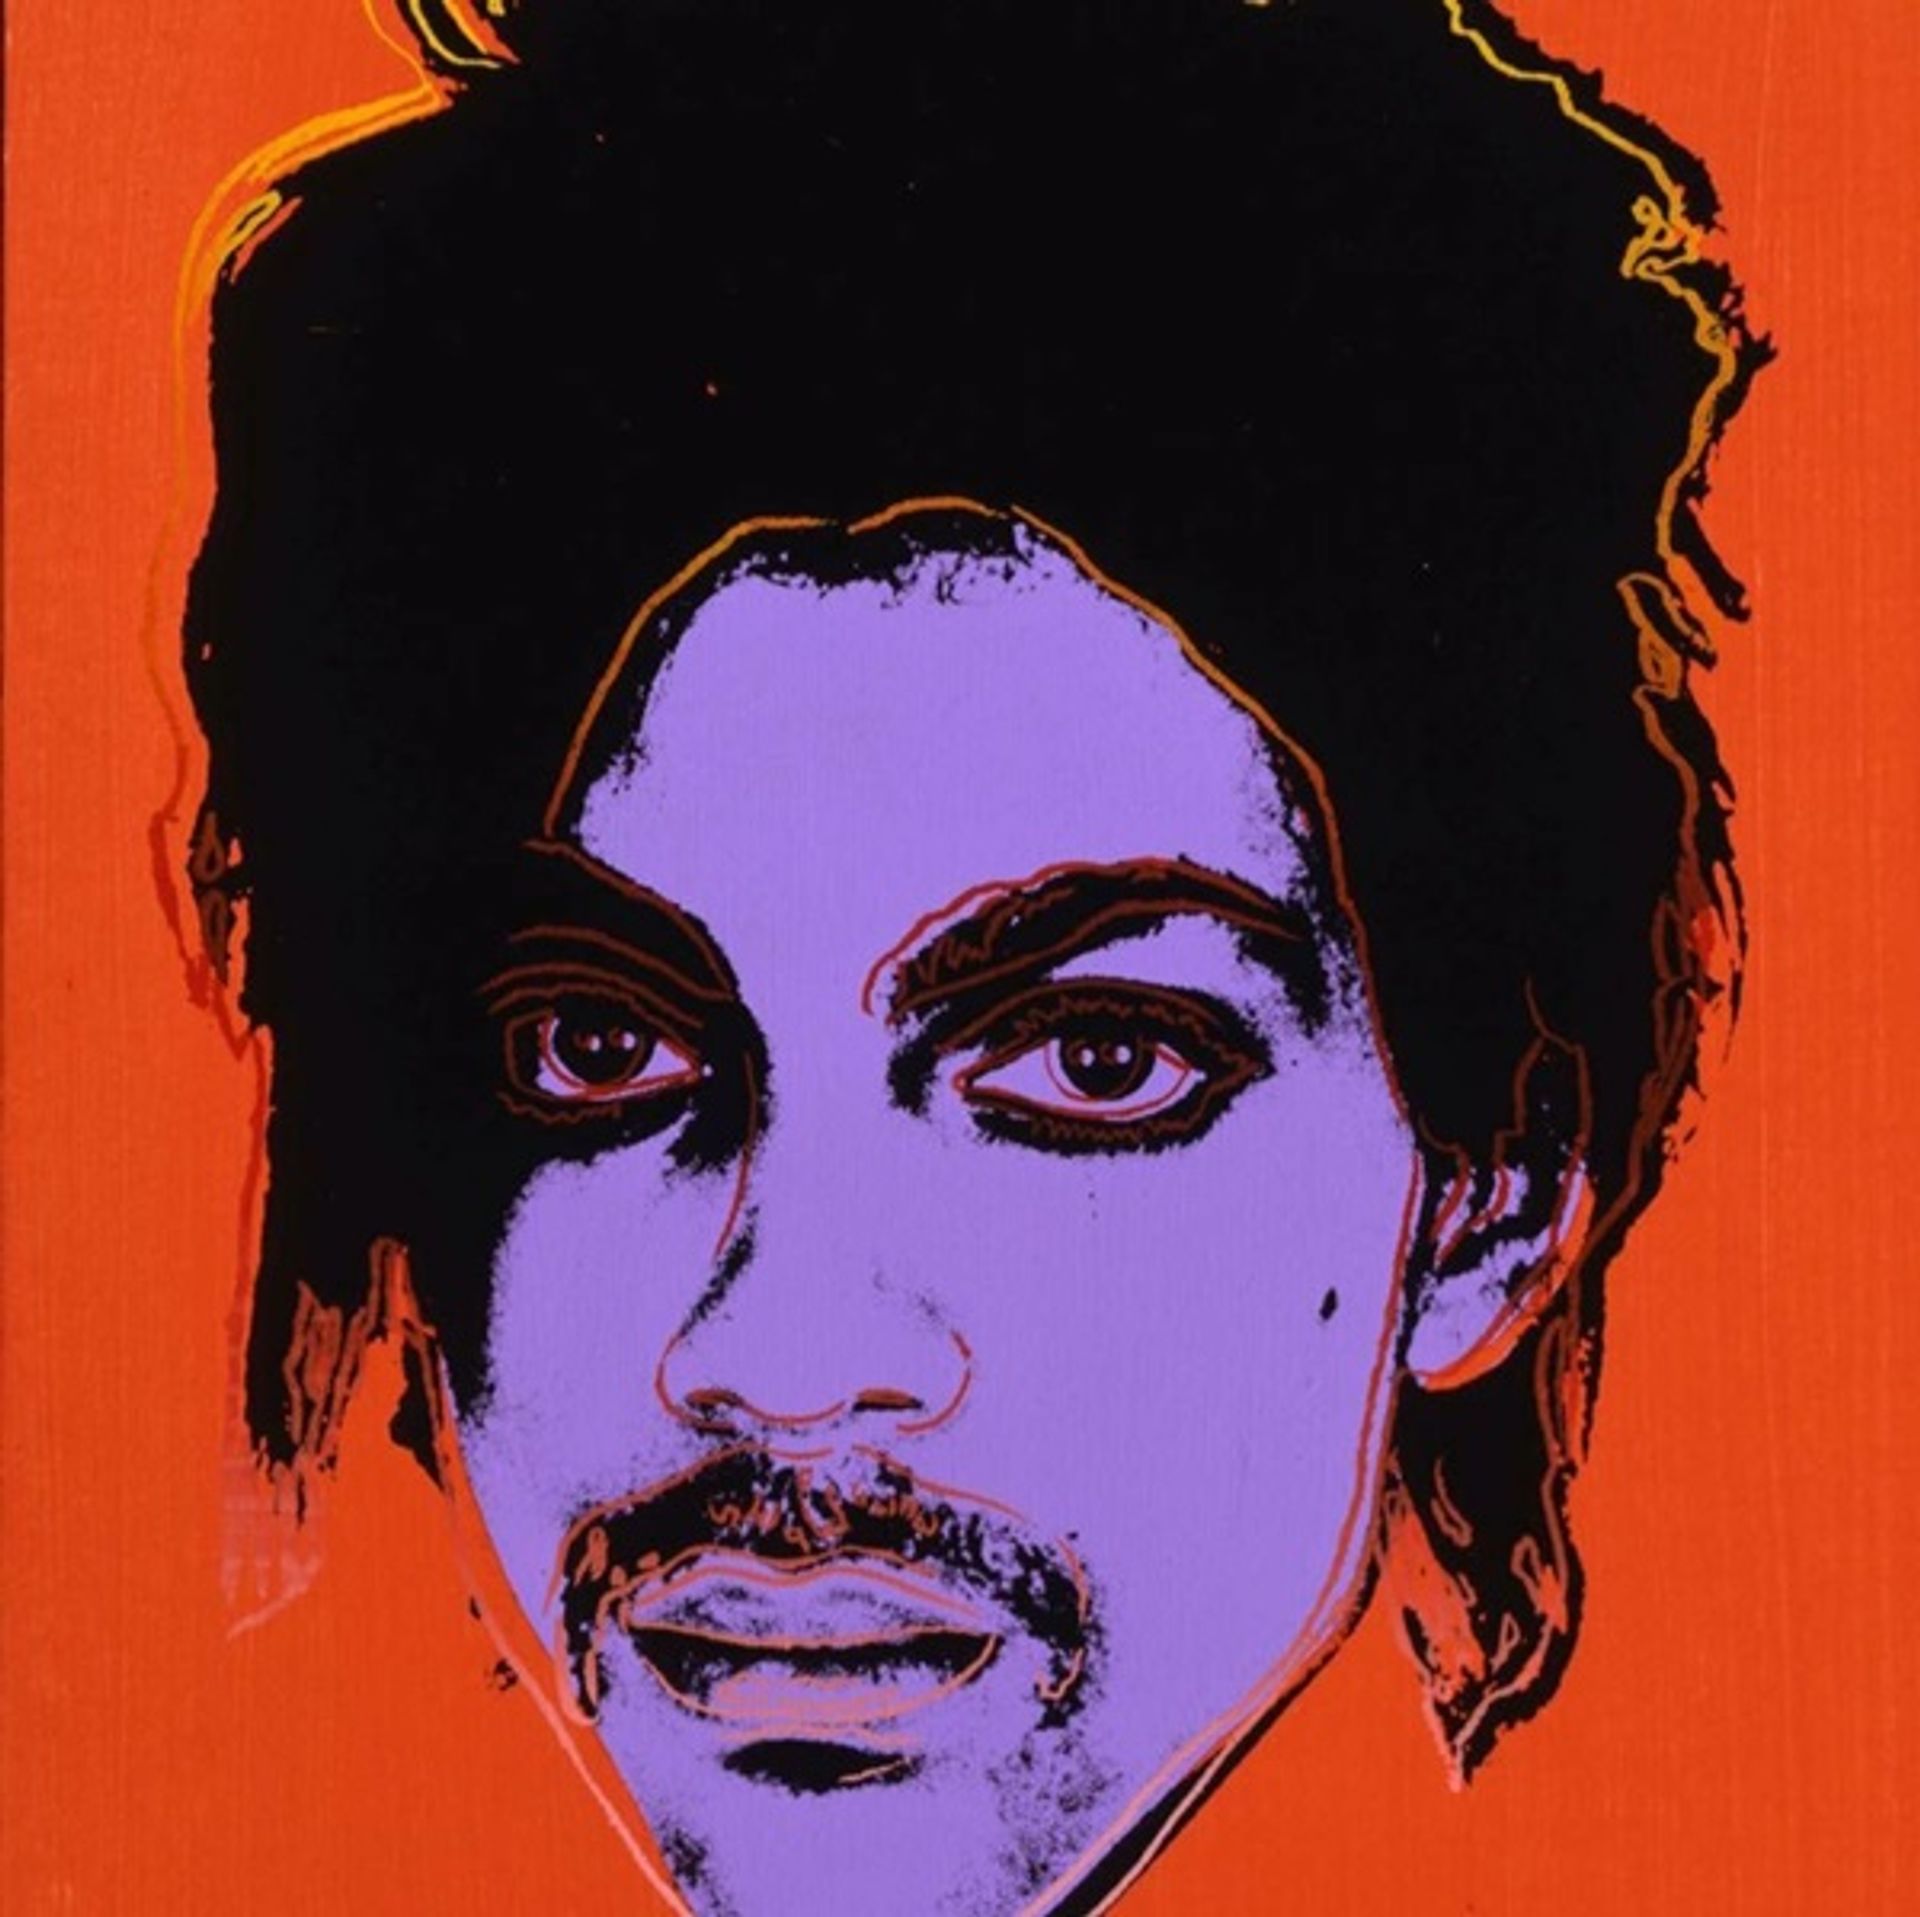 A portrait of Prince by Andy Warhol. 